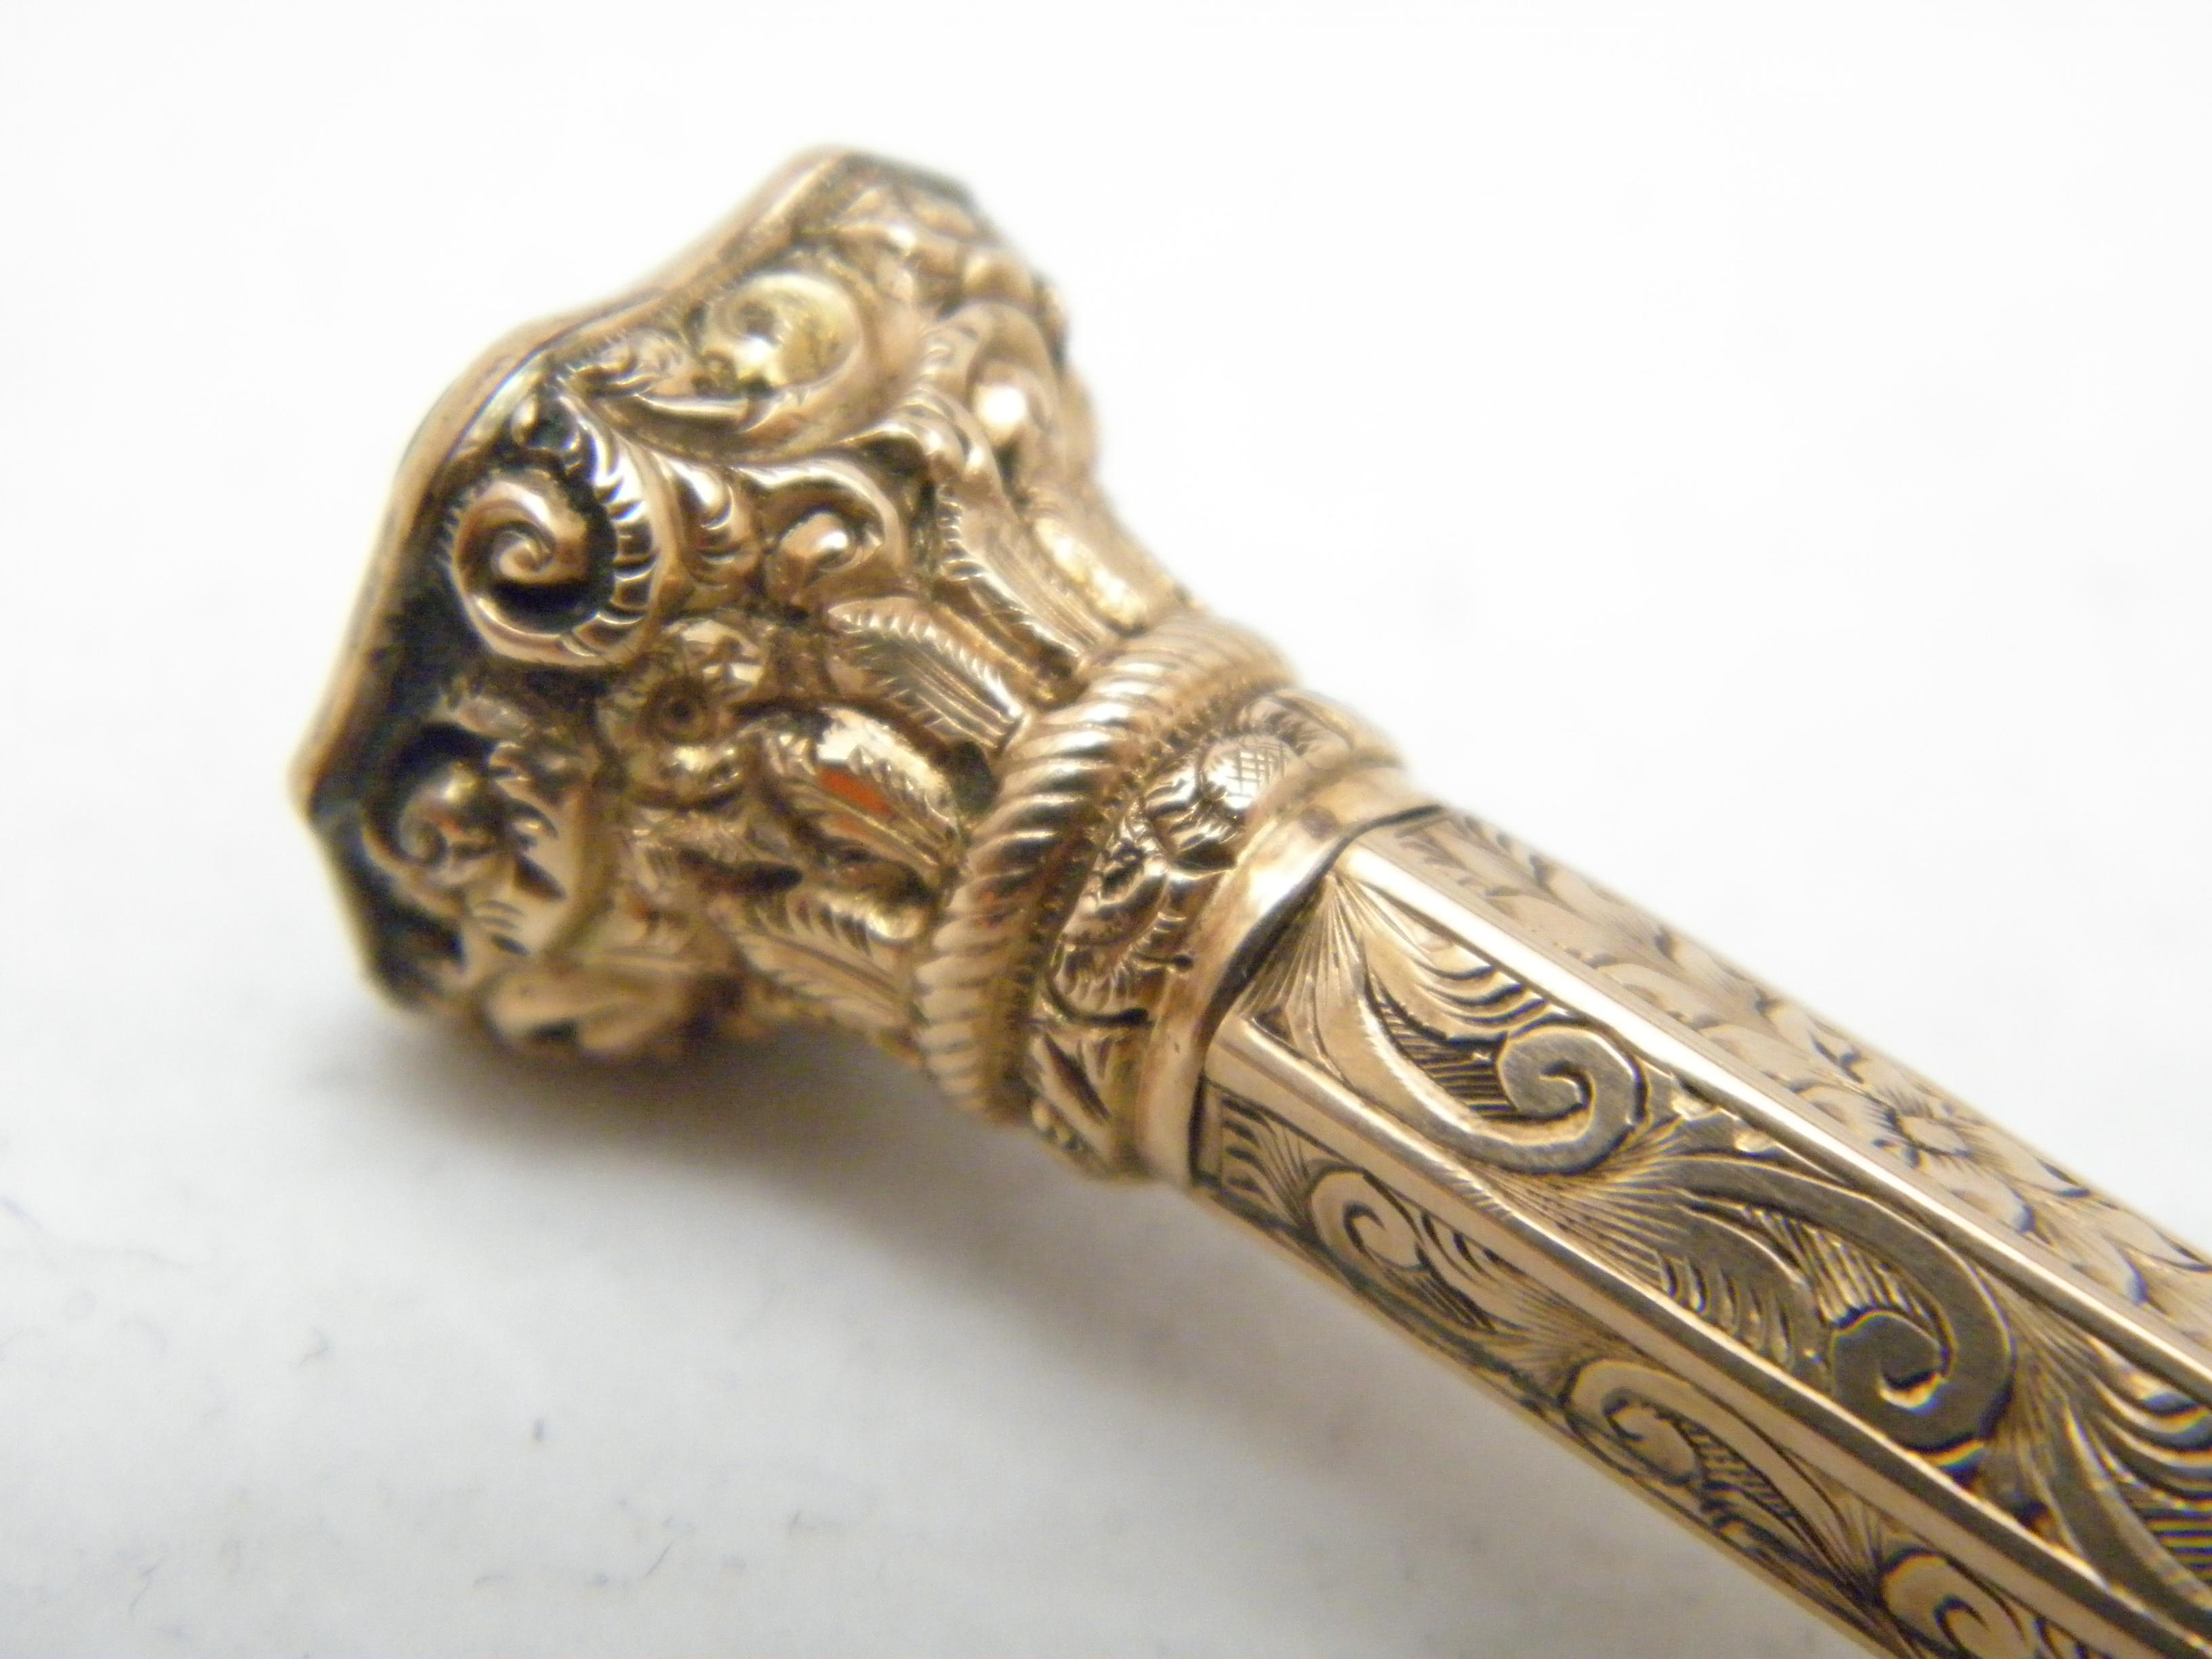 Antique 9ct Rose Gold Propelling Pencil c1850 375 Purity Massive Heavy 18.4g In Good Condition For Sale In Camelford, GB